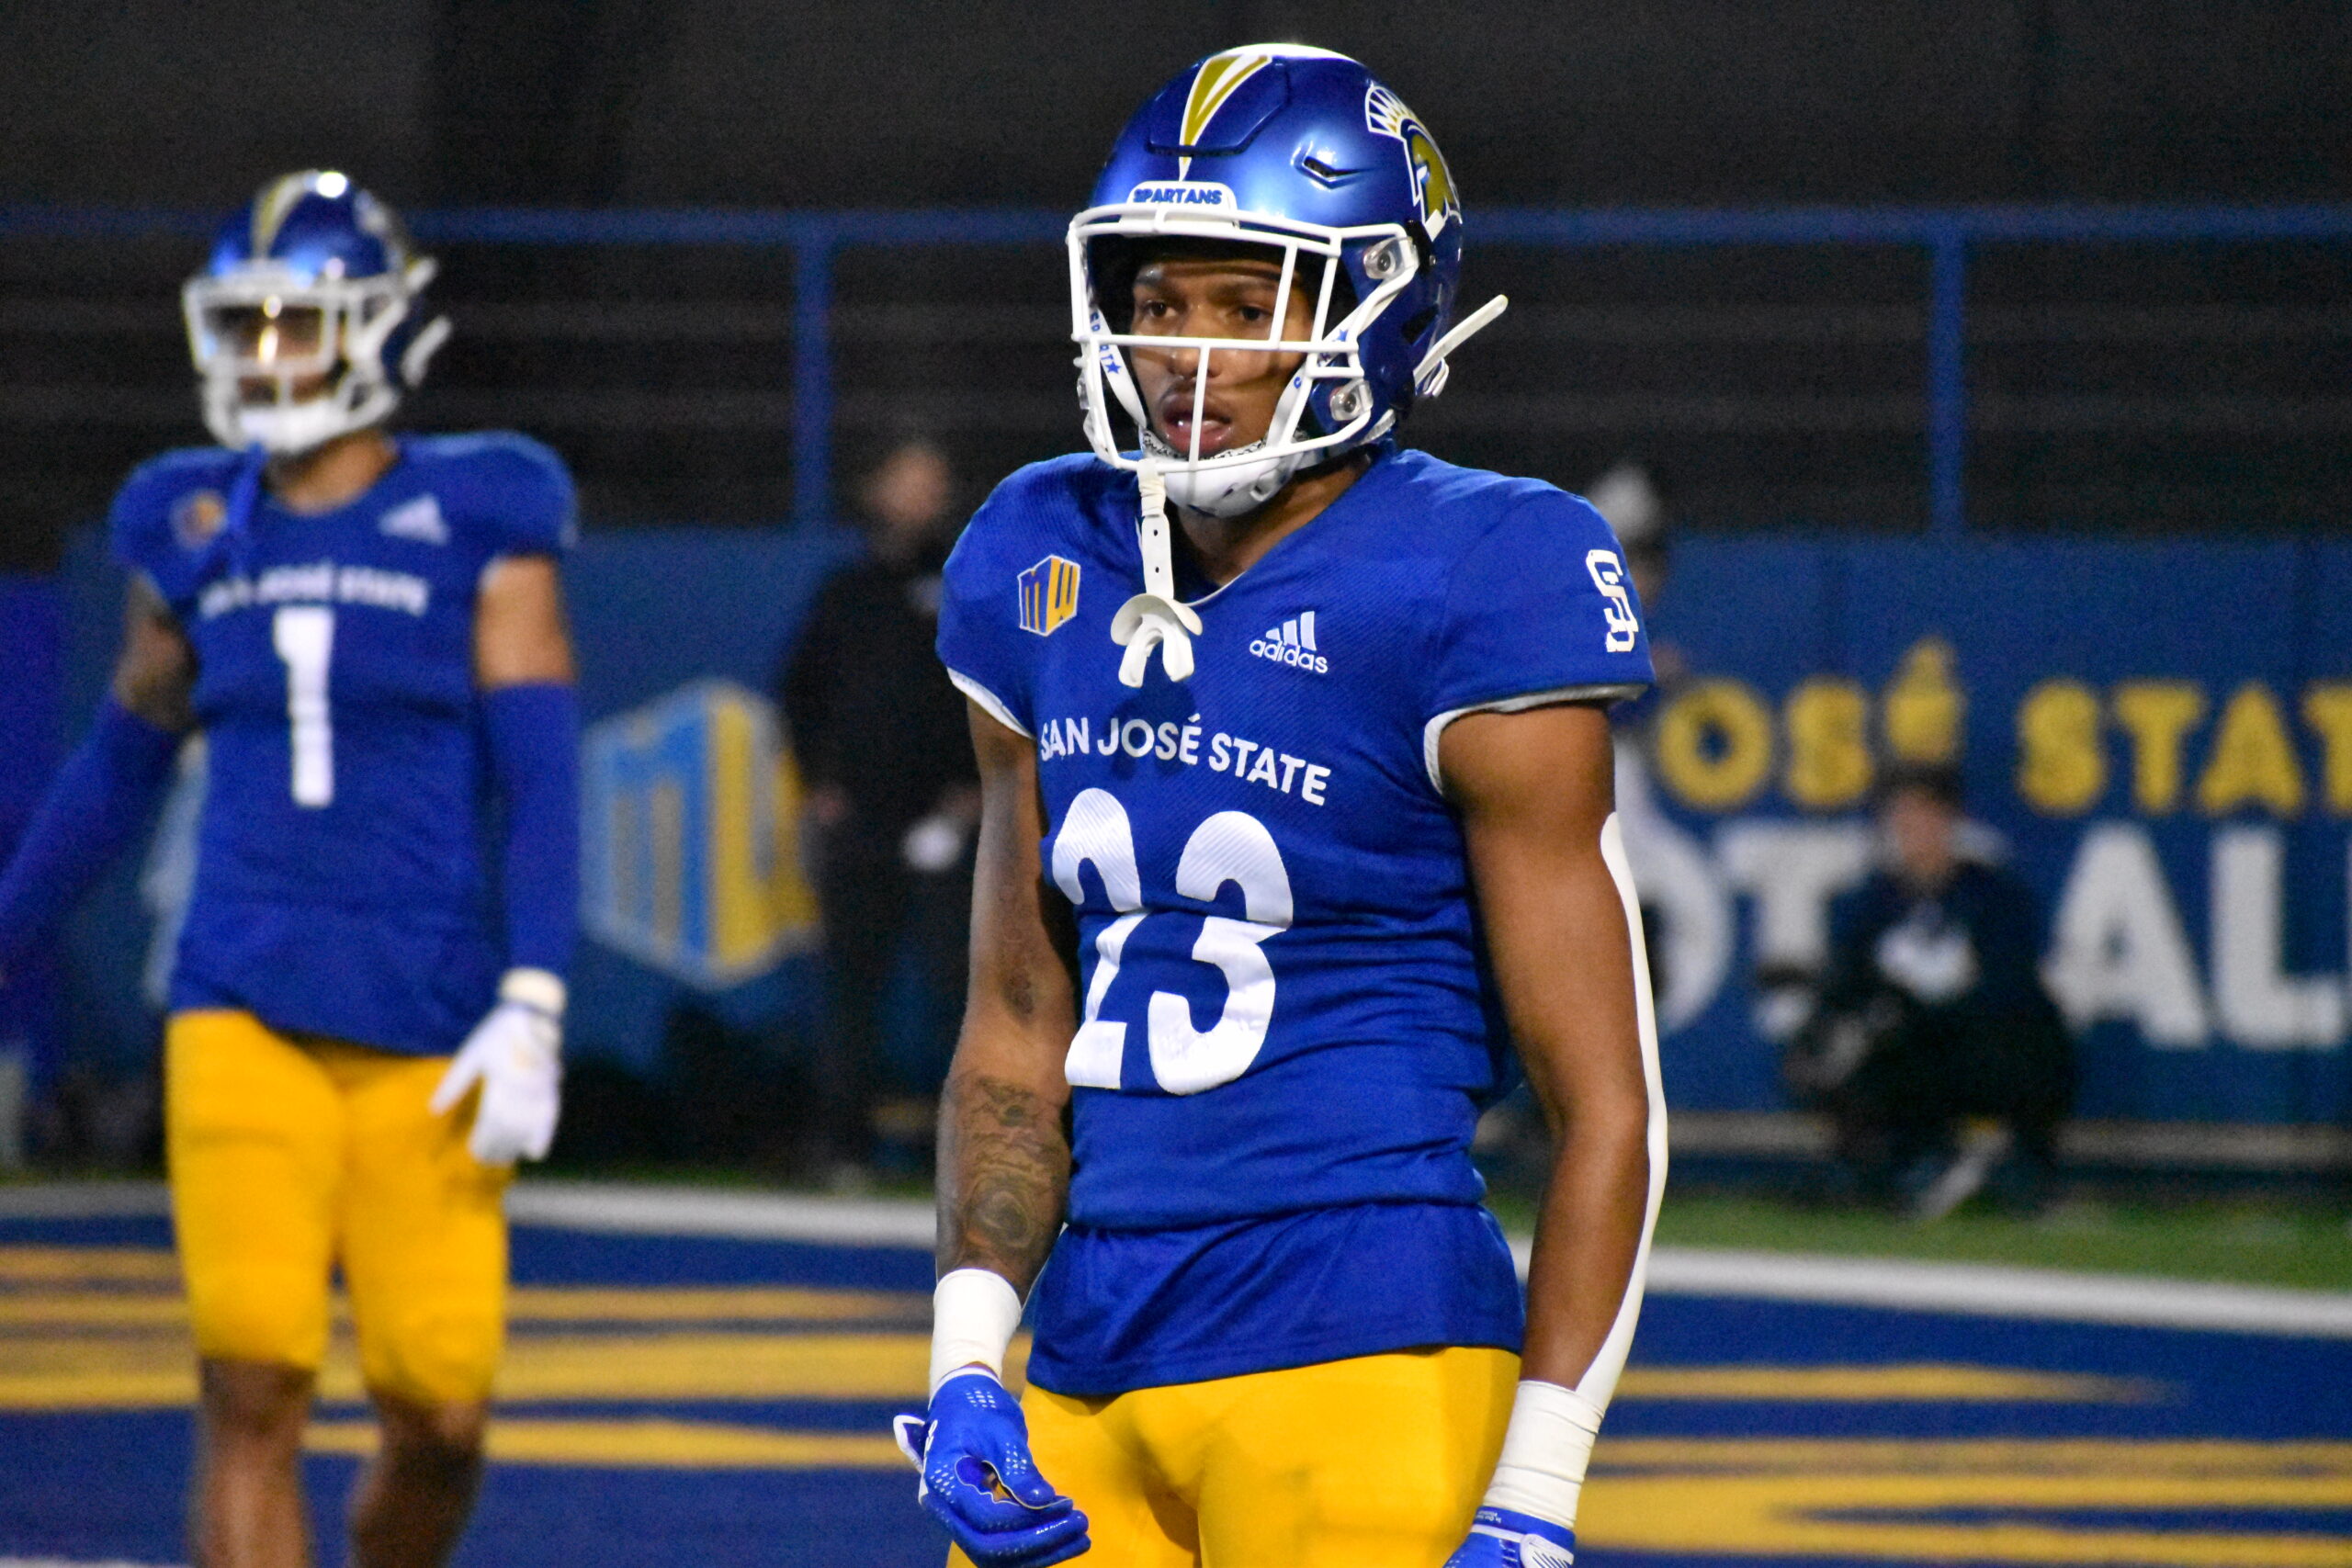 Bowl appearance for SJSU football was always in the cards